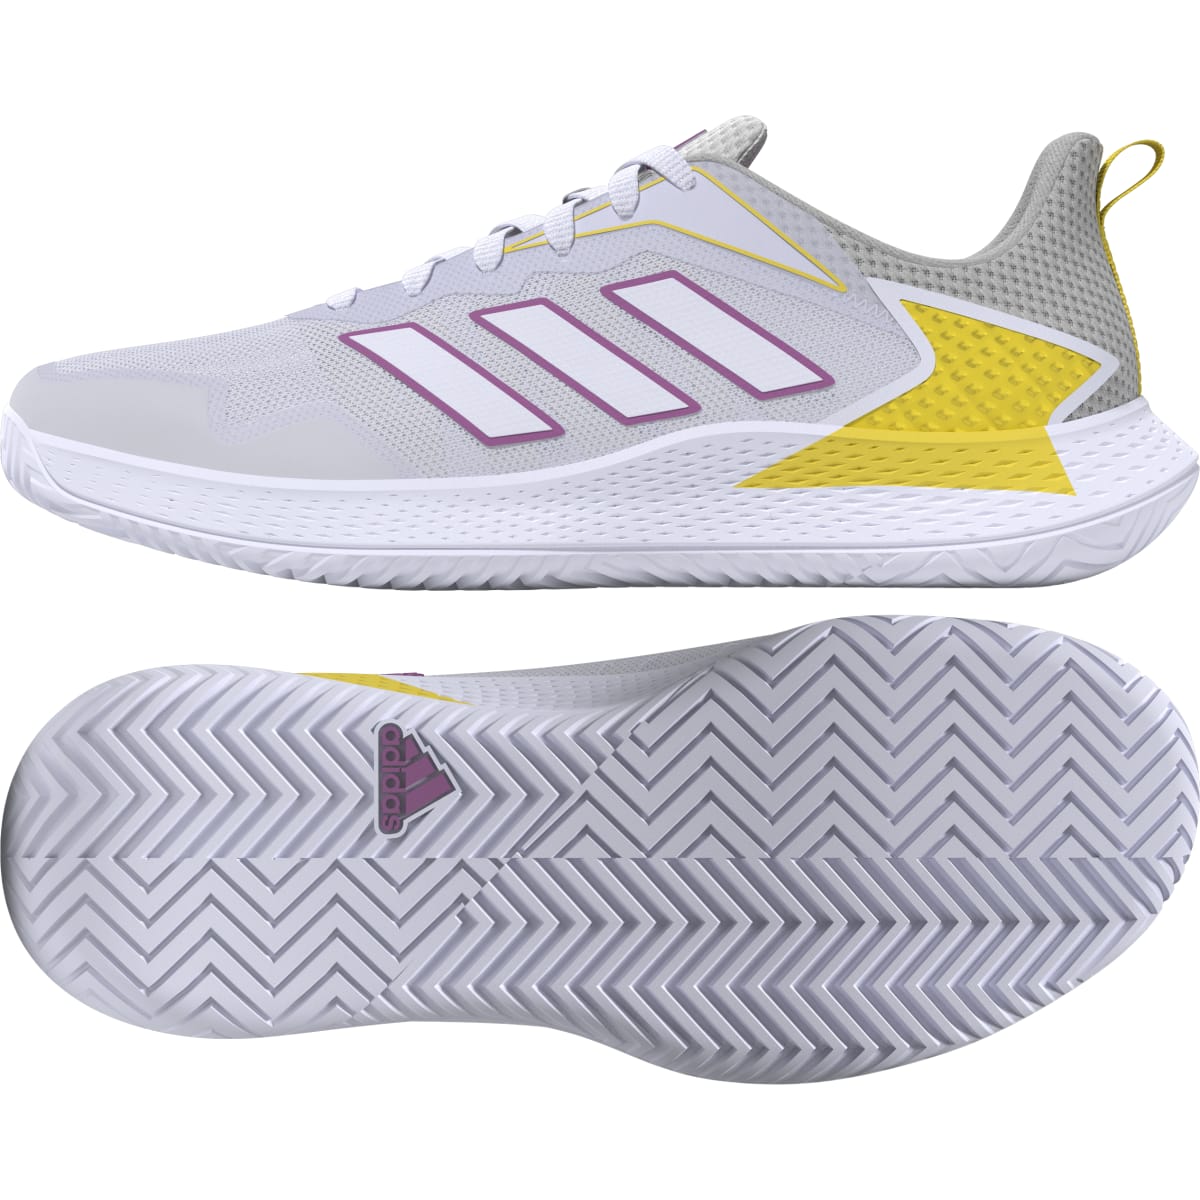 Women's Adidas Defiant Speed Tennis Shoes 8.5 White/Silver Grey